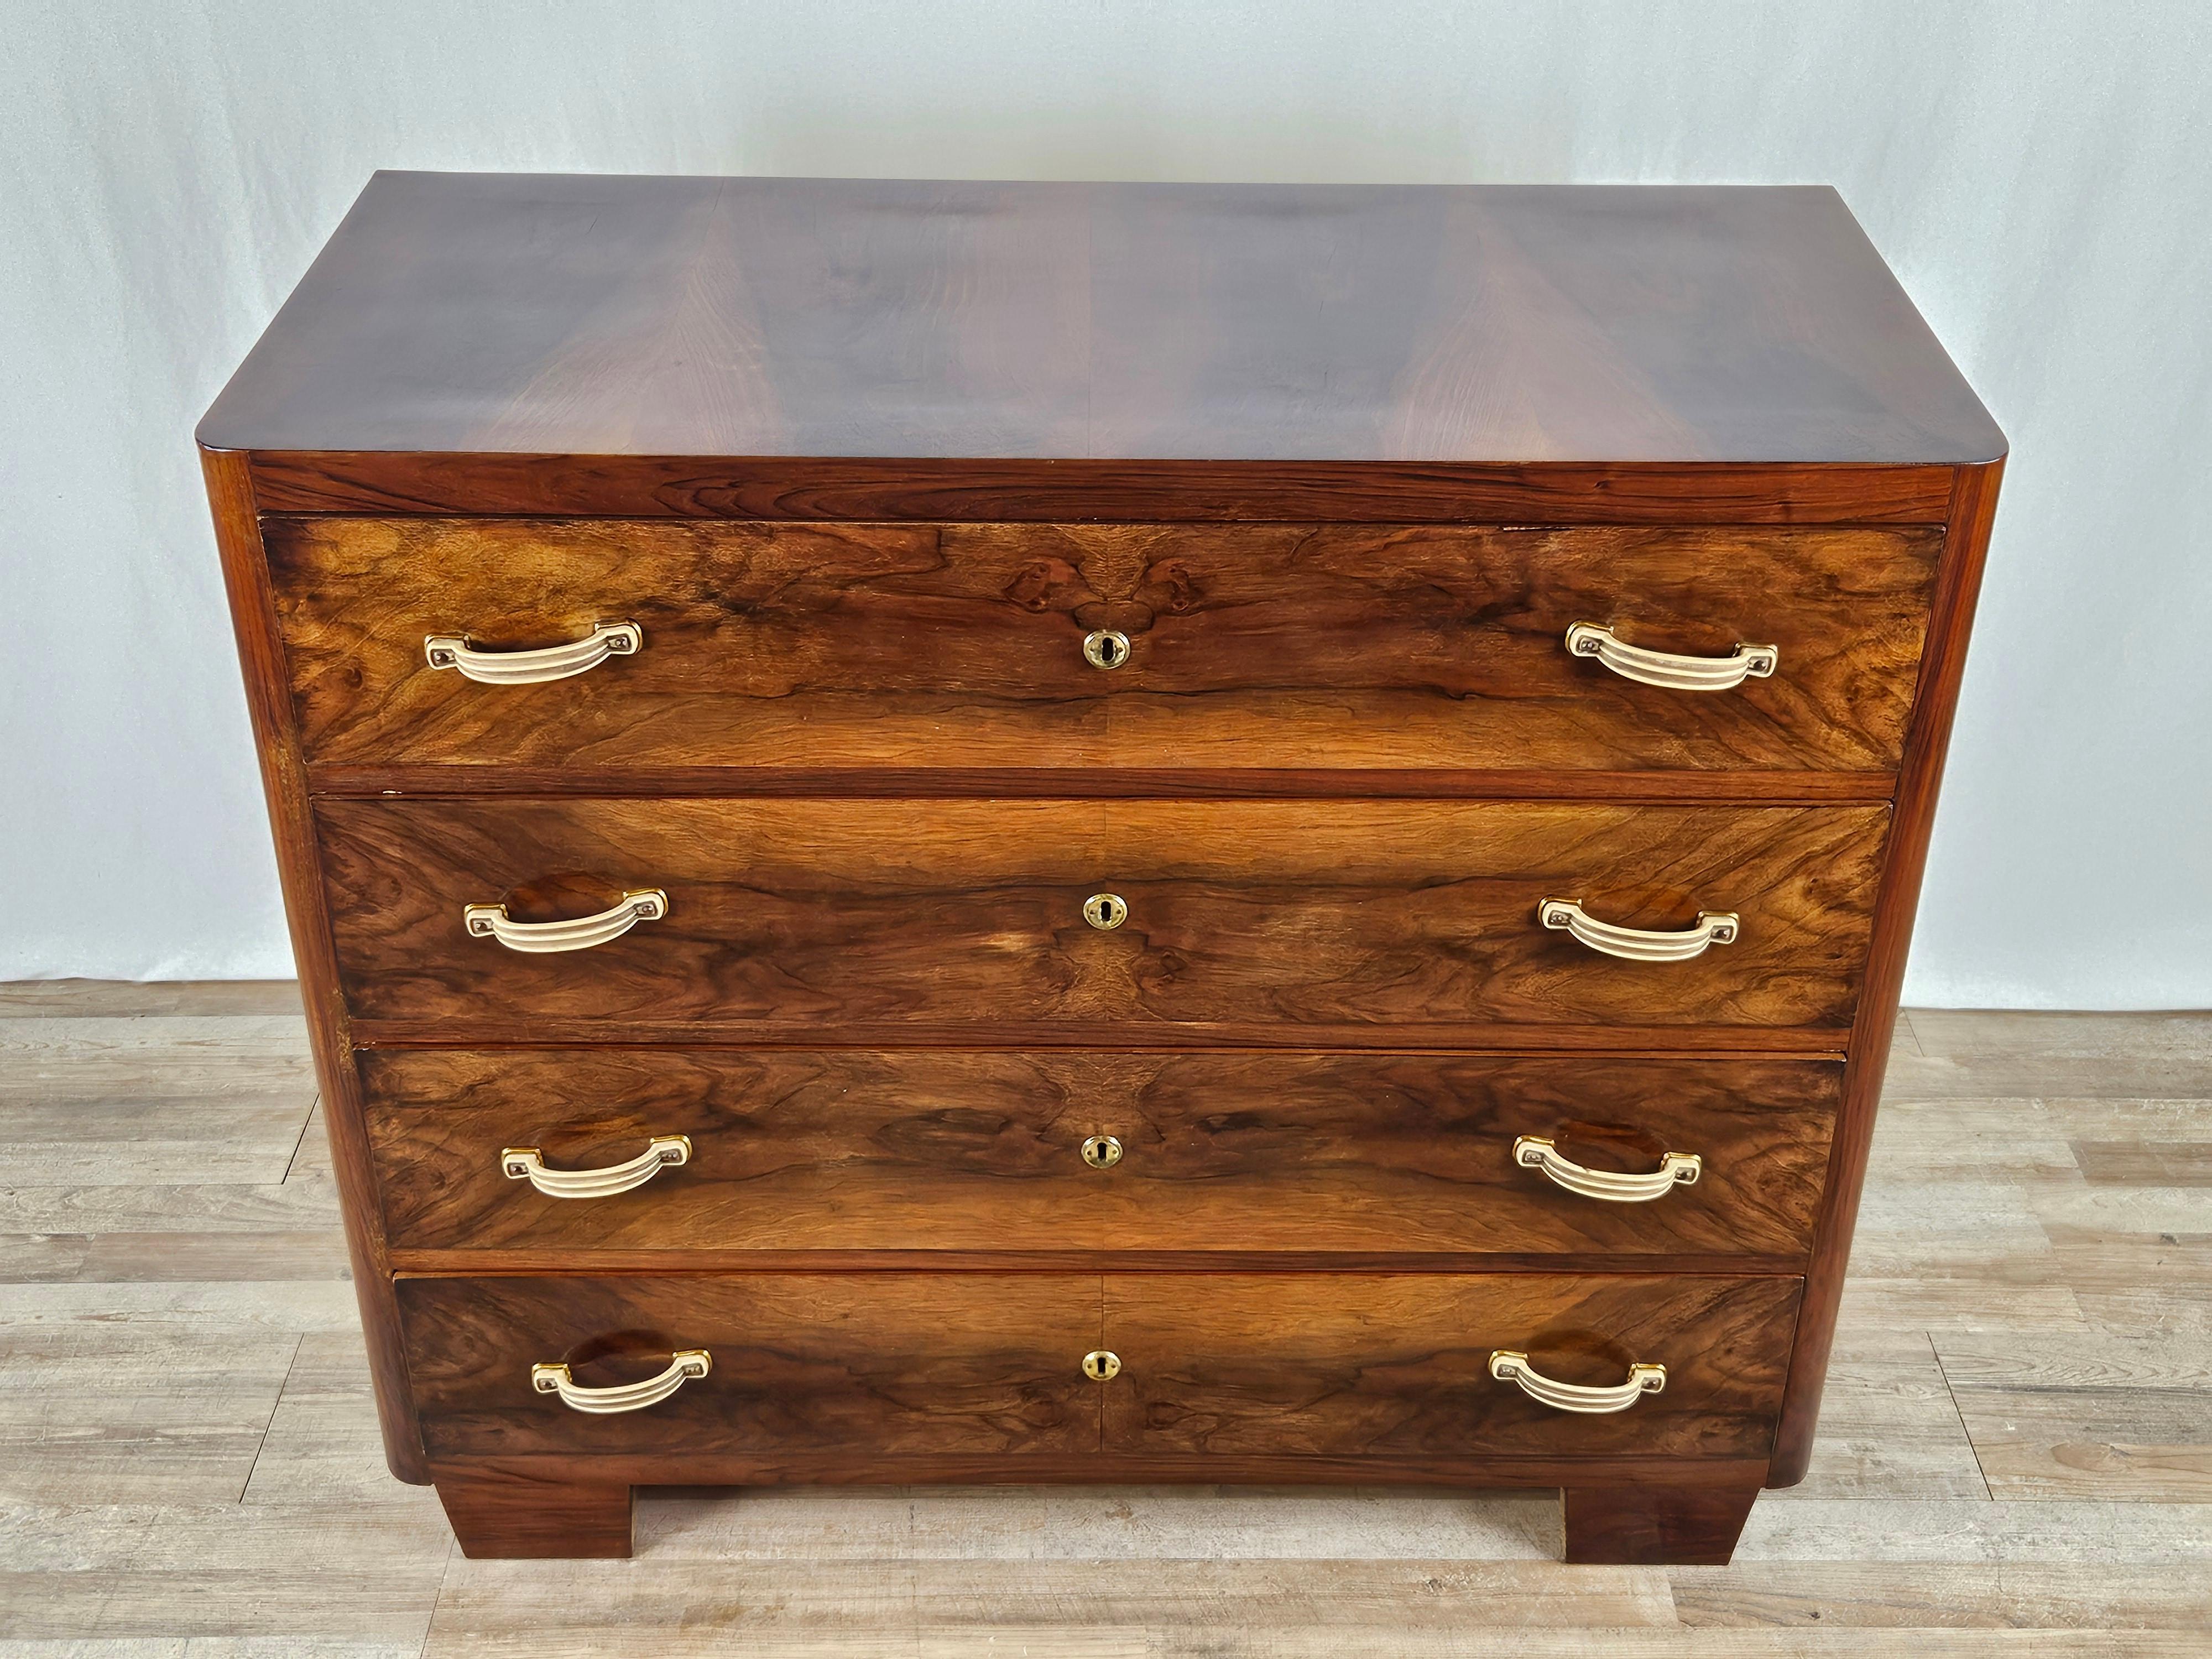 Elegant and refined walnut briar dresser from the early 1940s, Italian production of high quality and workmanship.

Linear design and small size with proportions ideal for any kind of environment from vintage to antique.

Polished with oil and